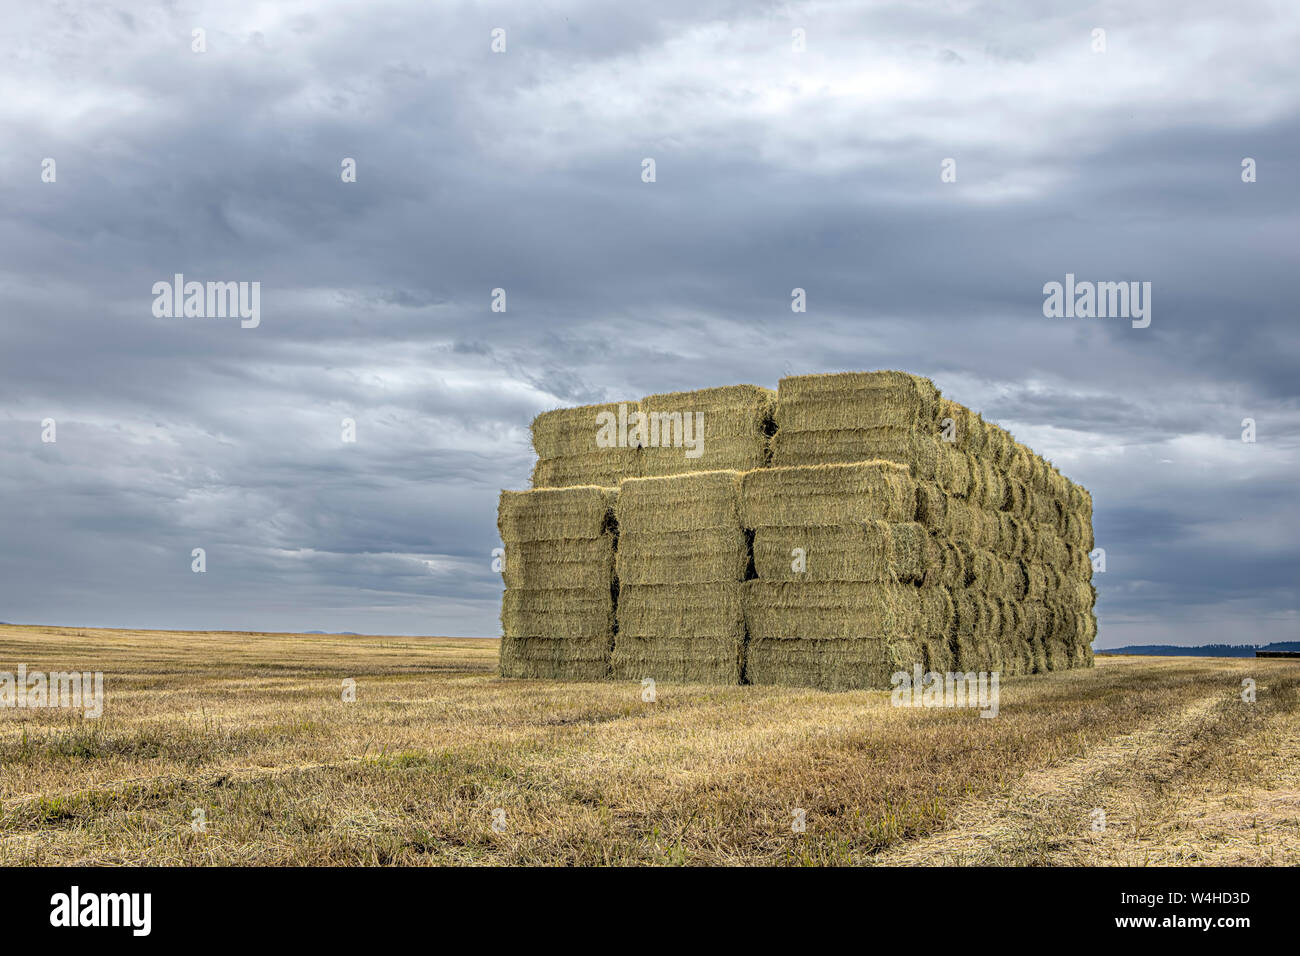 A large stack of hay bales in a harvested field in Rathdrum, Idaho. Stock Photo